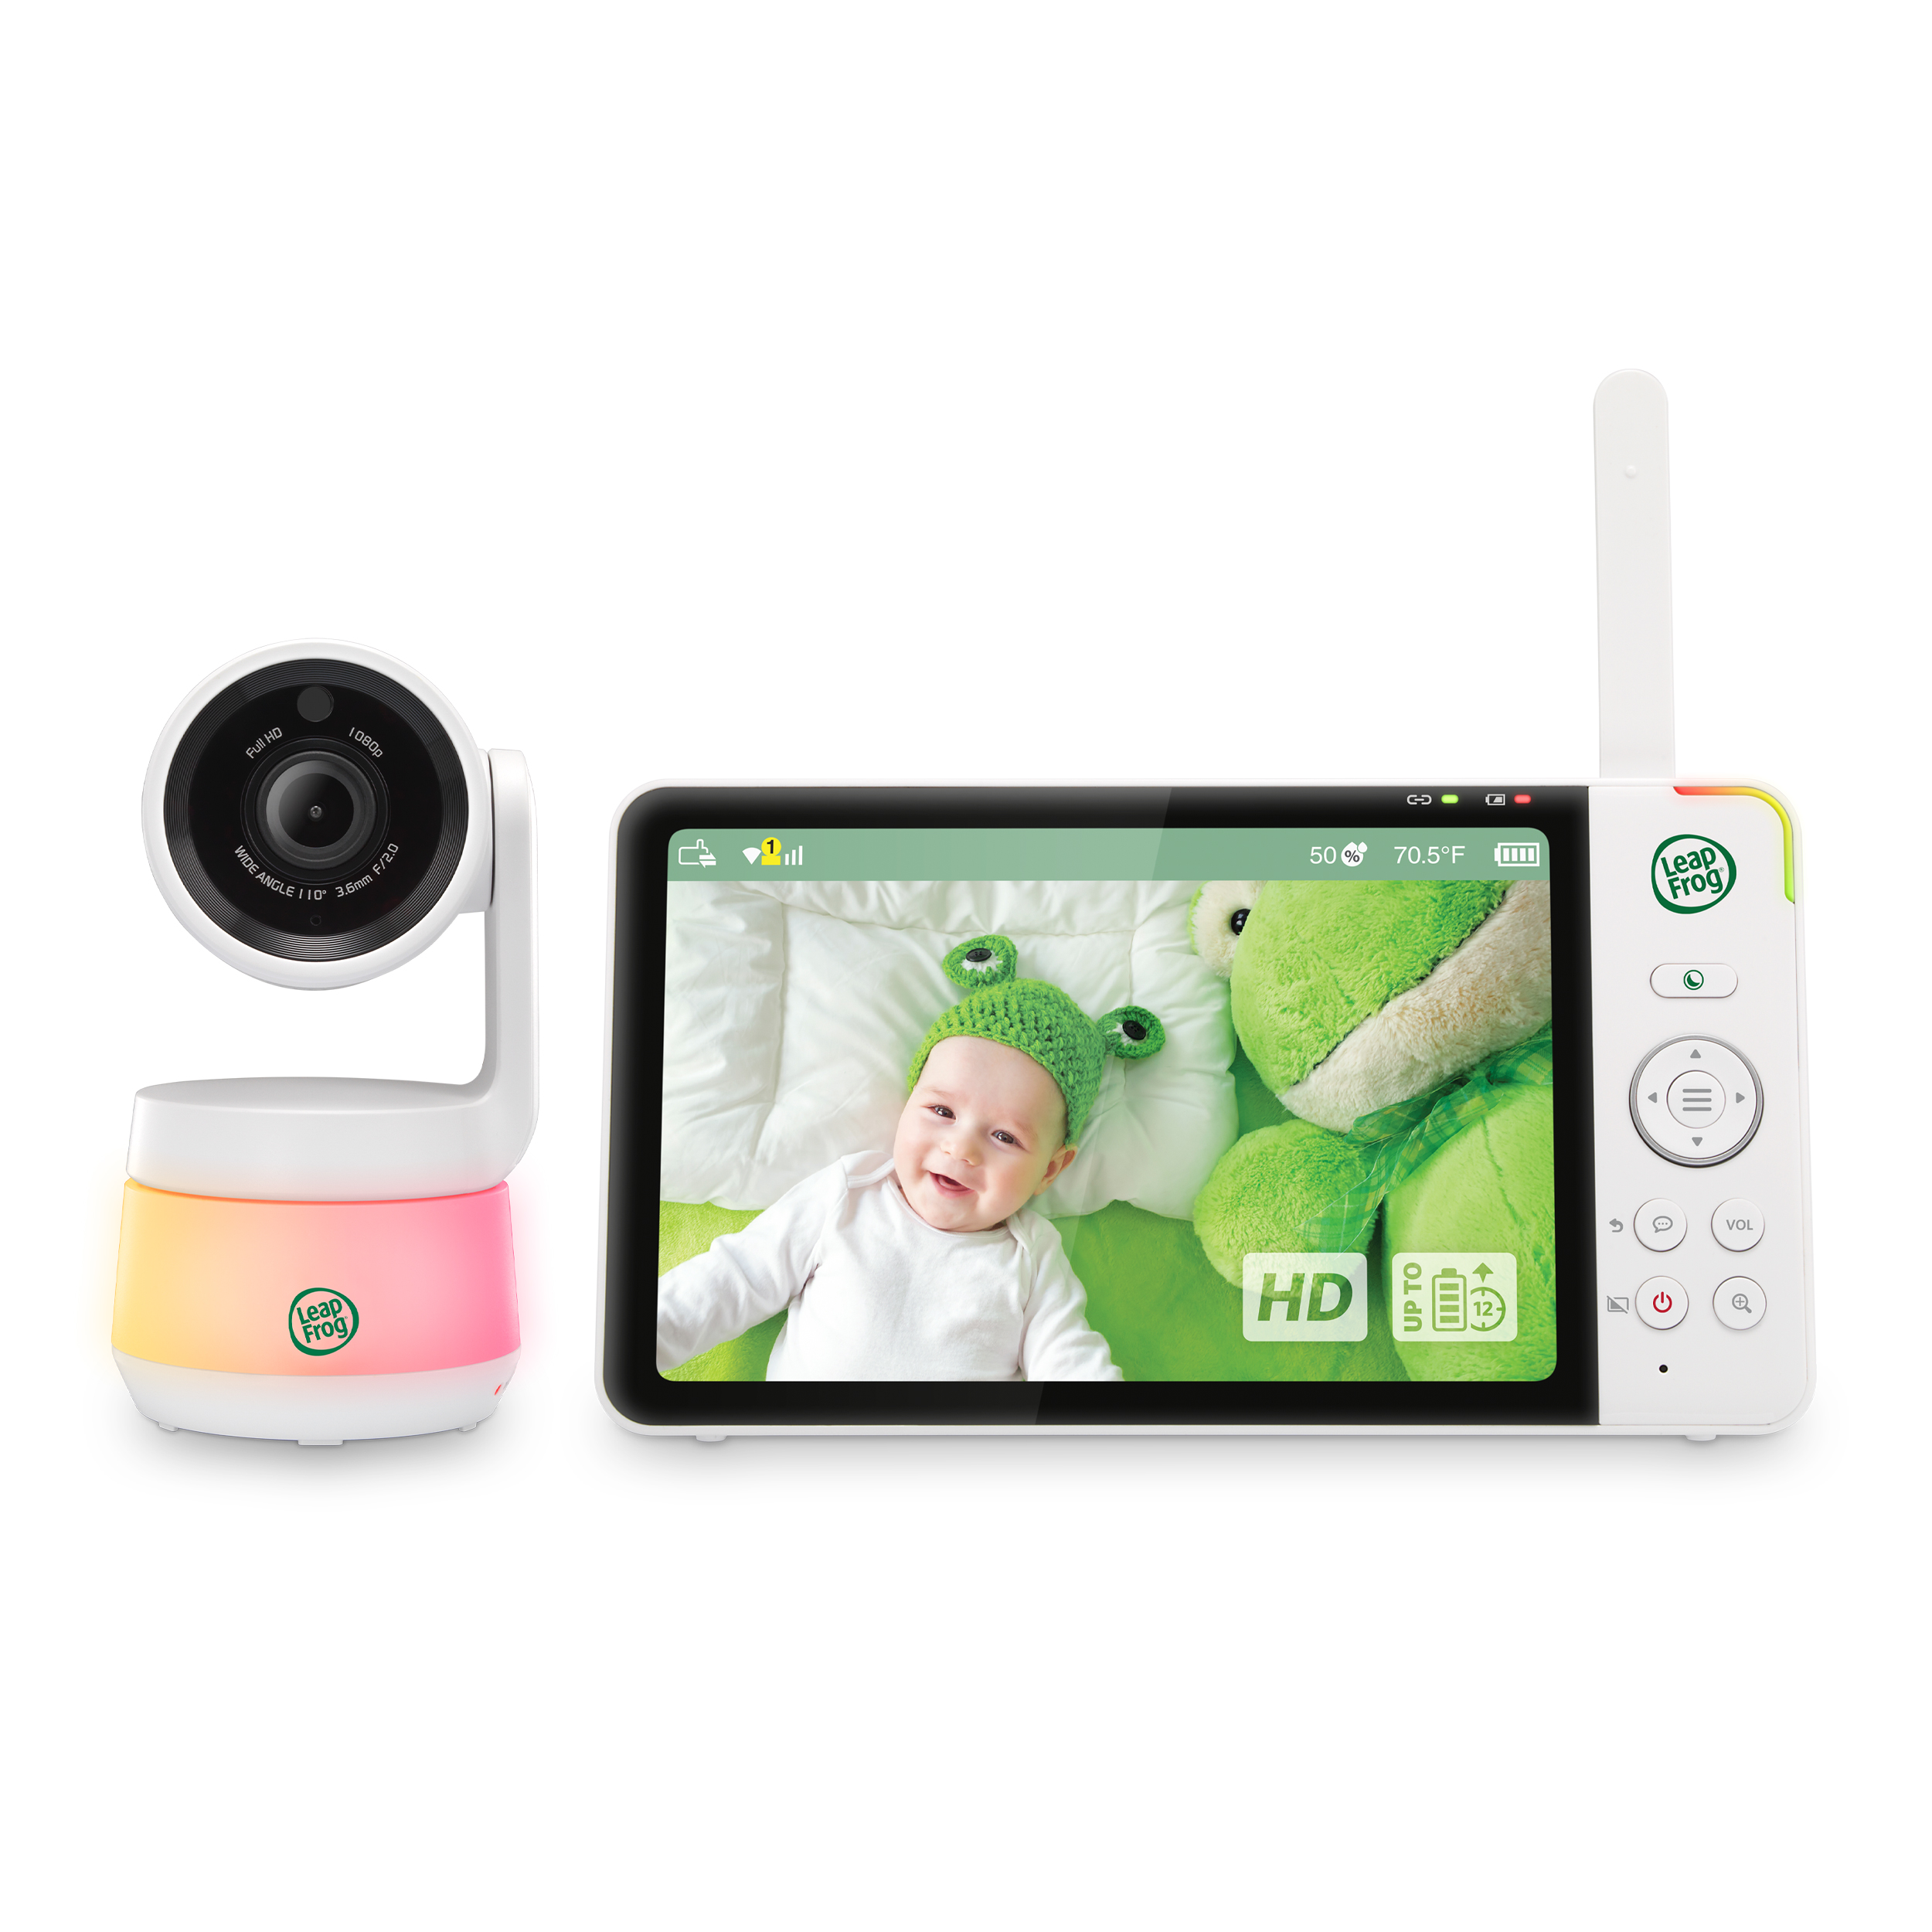 Remote Access Smart Video Baby Monitor